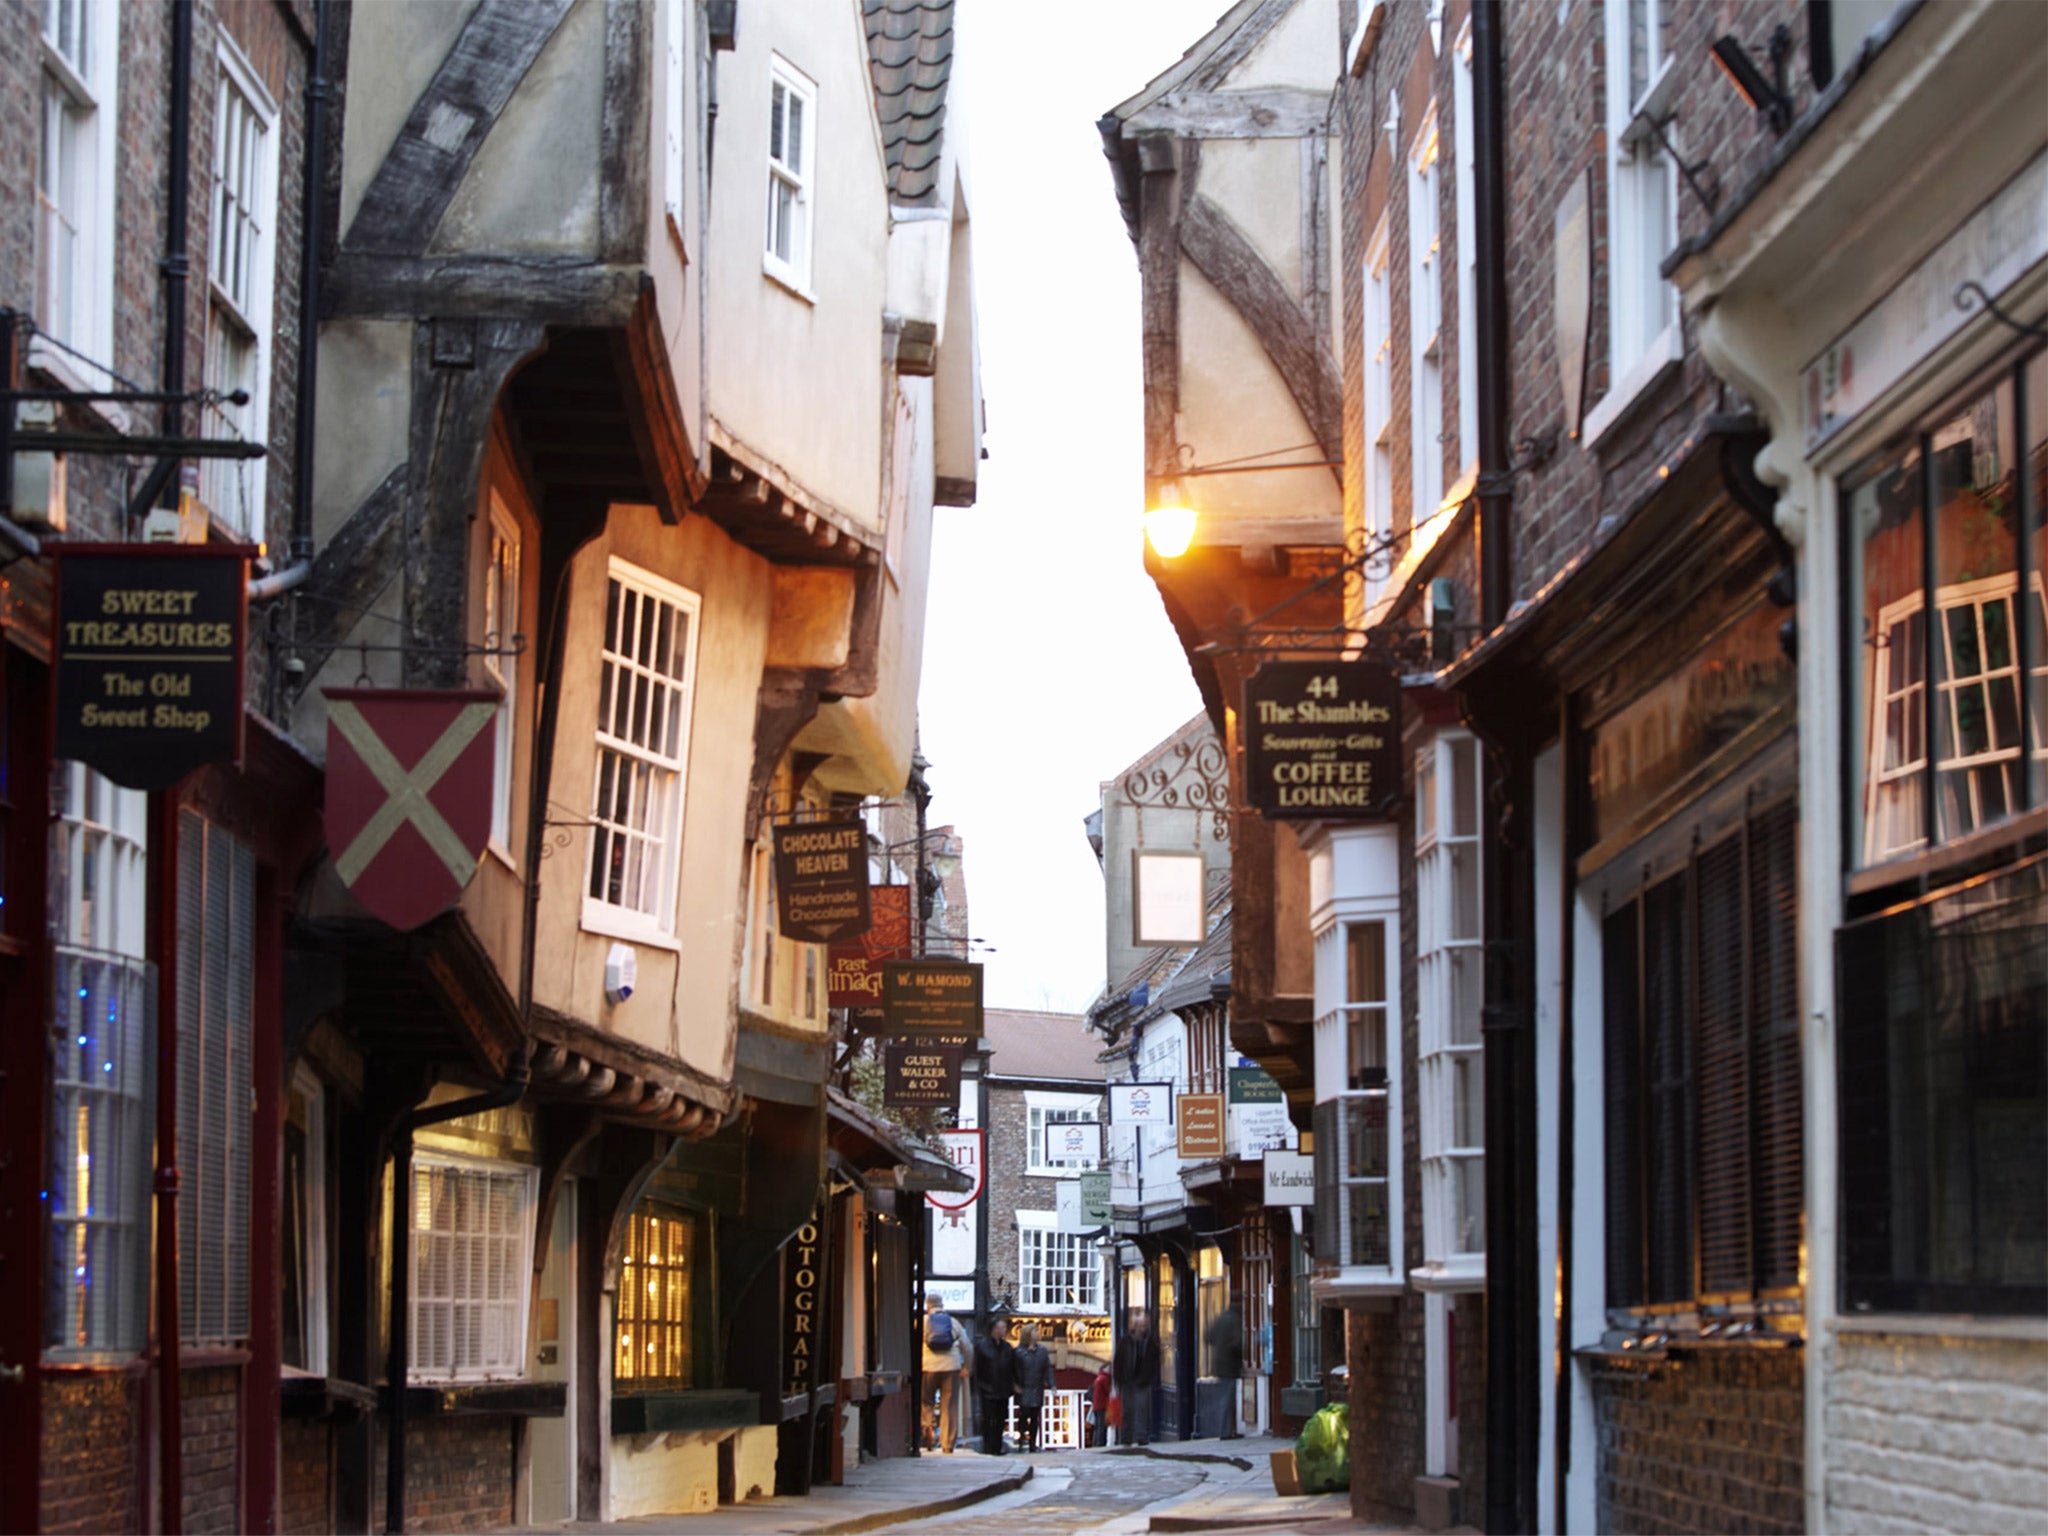 The Shambles, York's most famous street